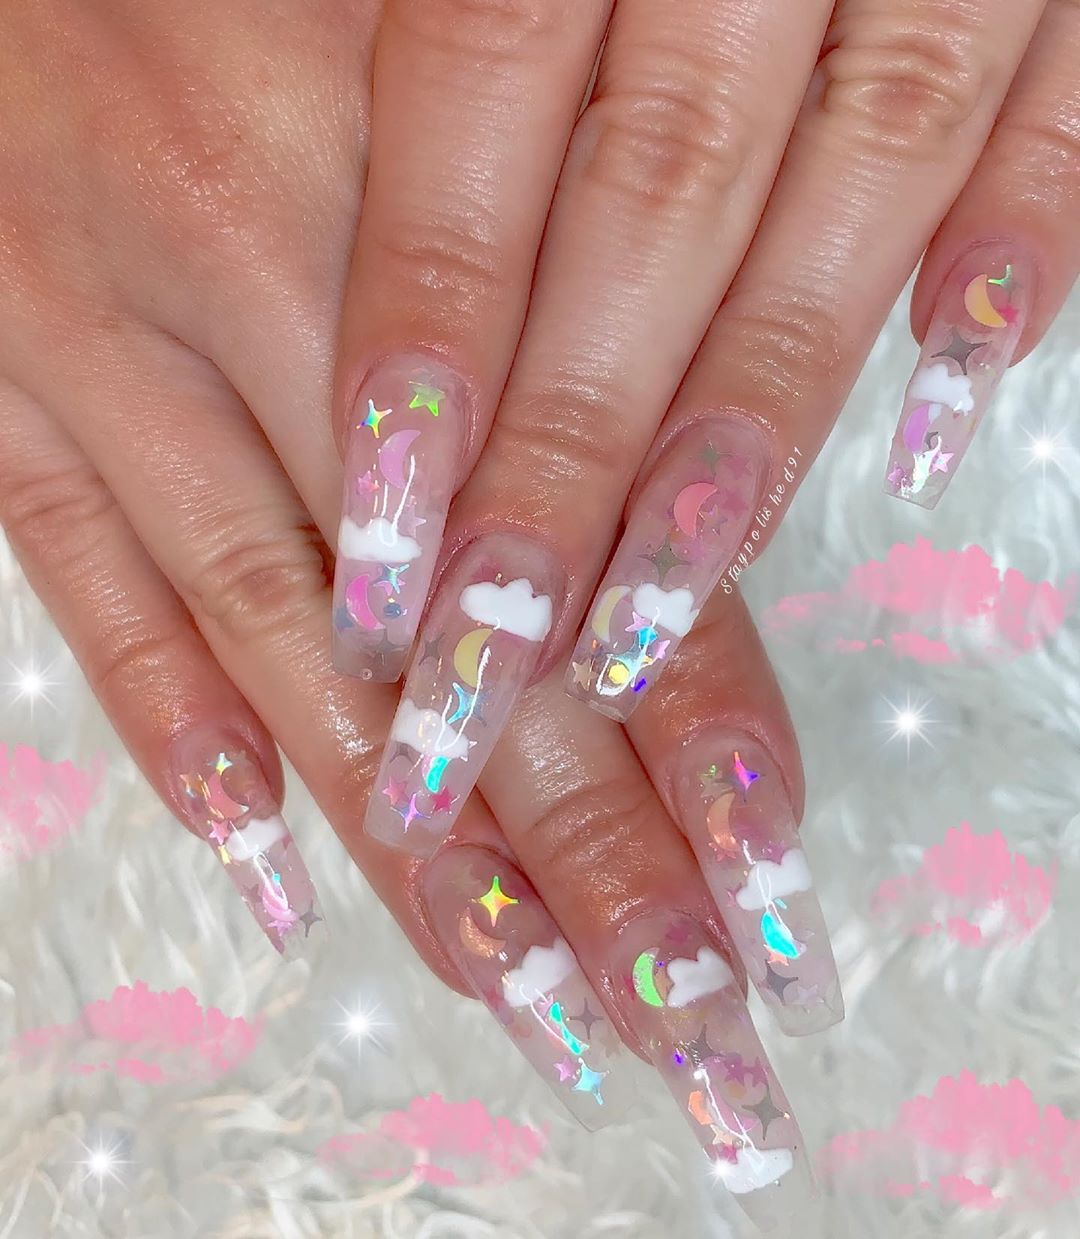 glass-nail-trend-style-rave